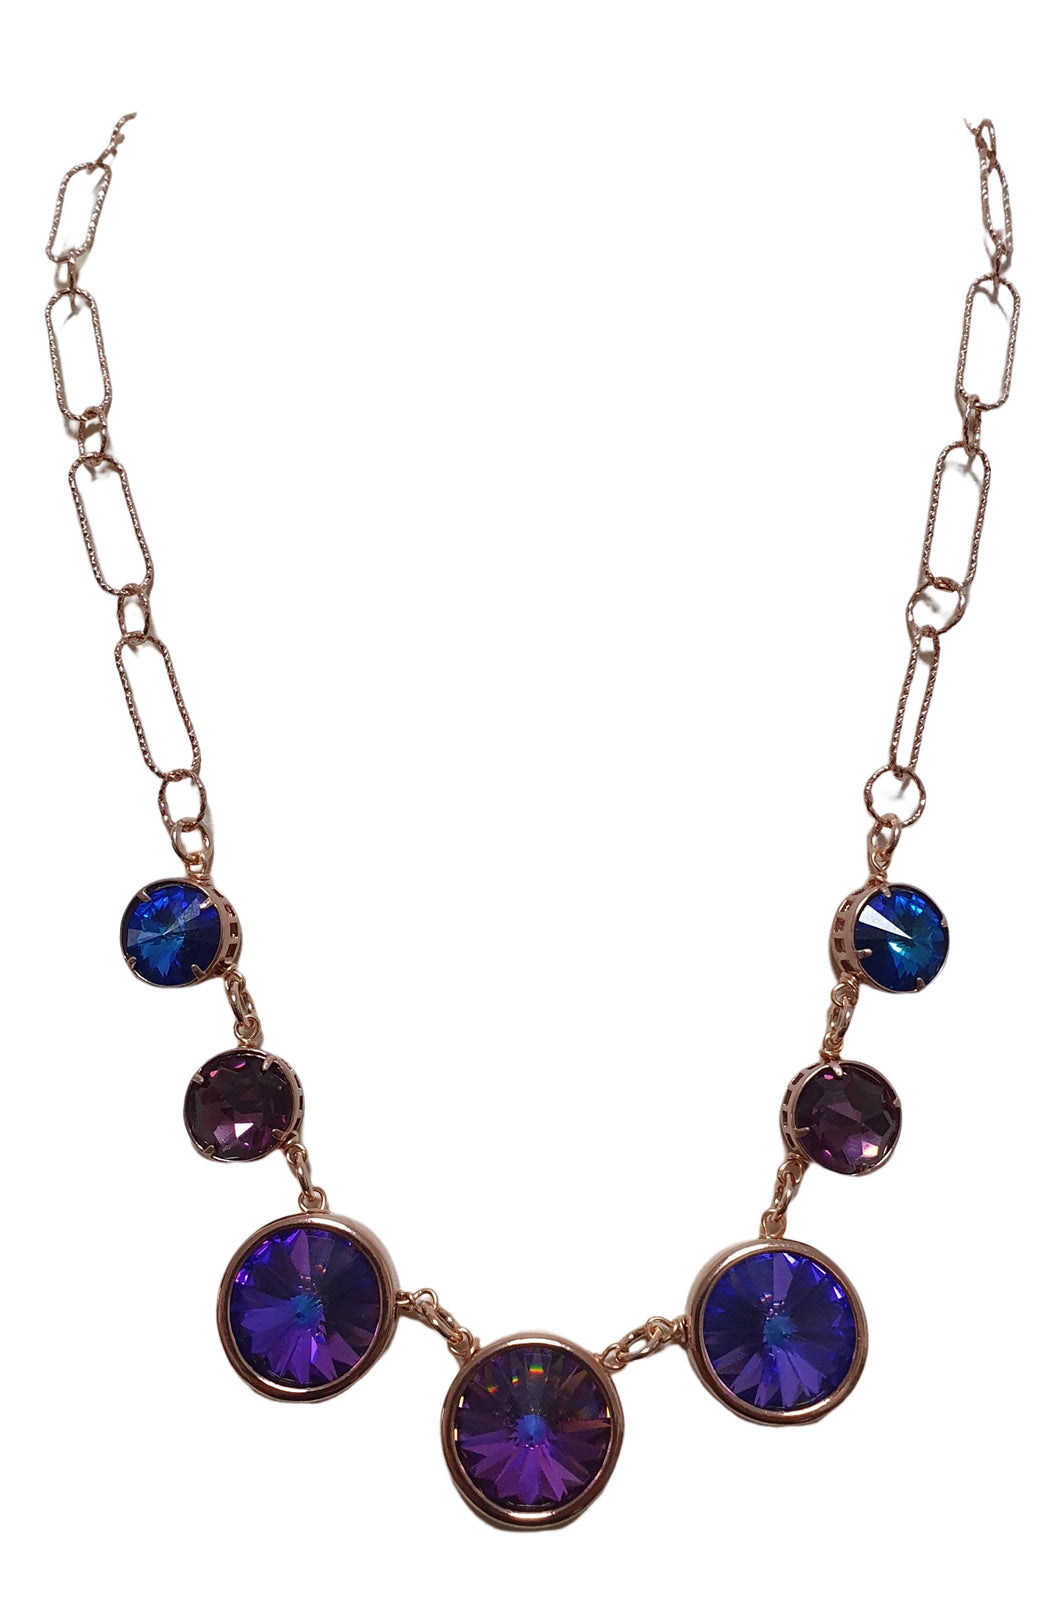 Hand-inserted necklace with lapis and amber balls